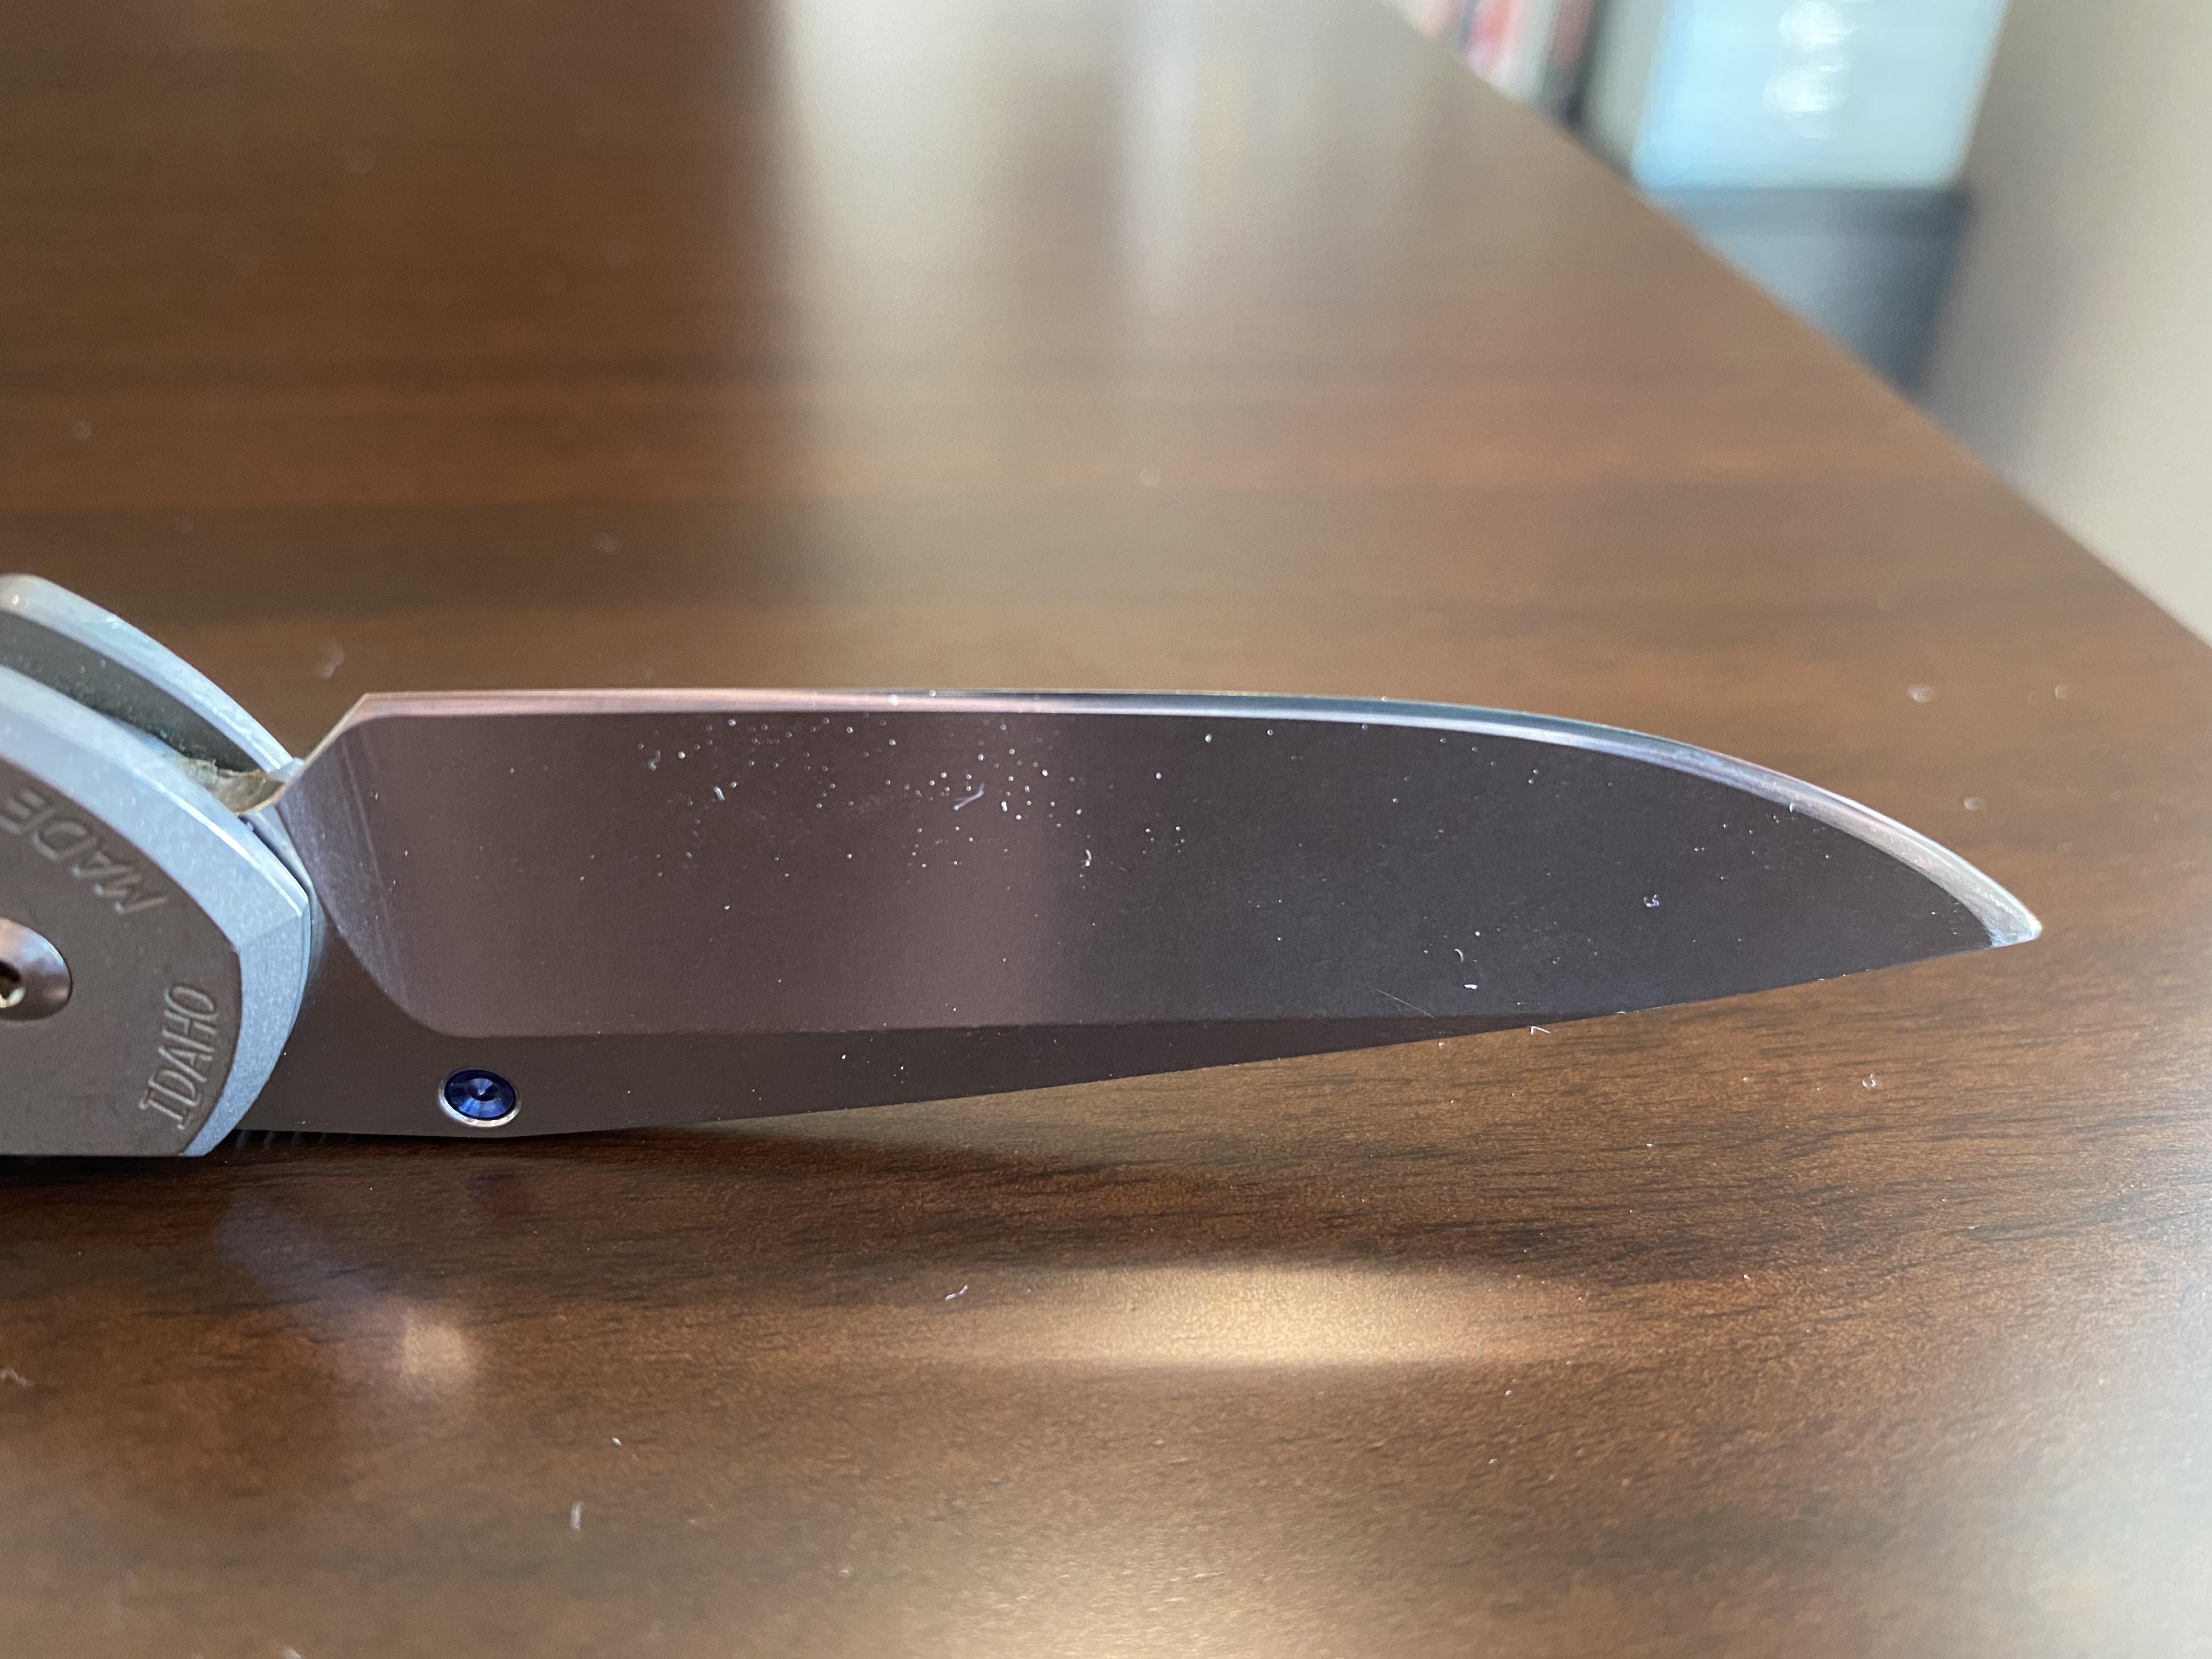 Edge Pro Apex, Knife Sharpening — Let's Talk – The Brooks Review